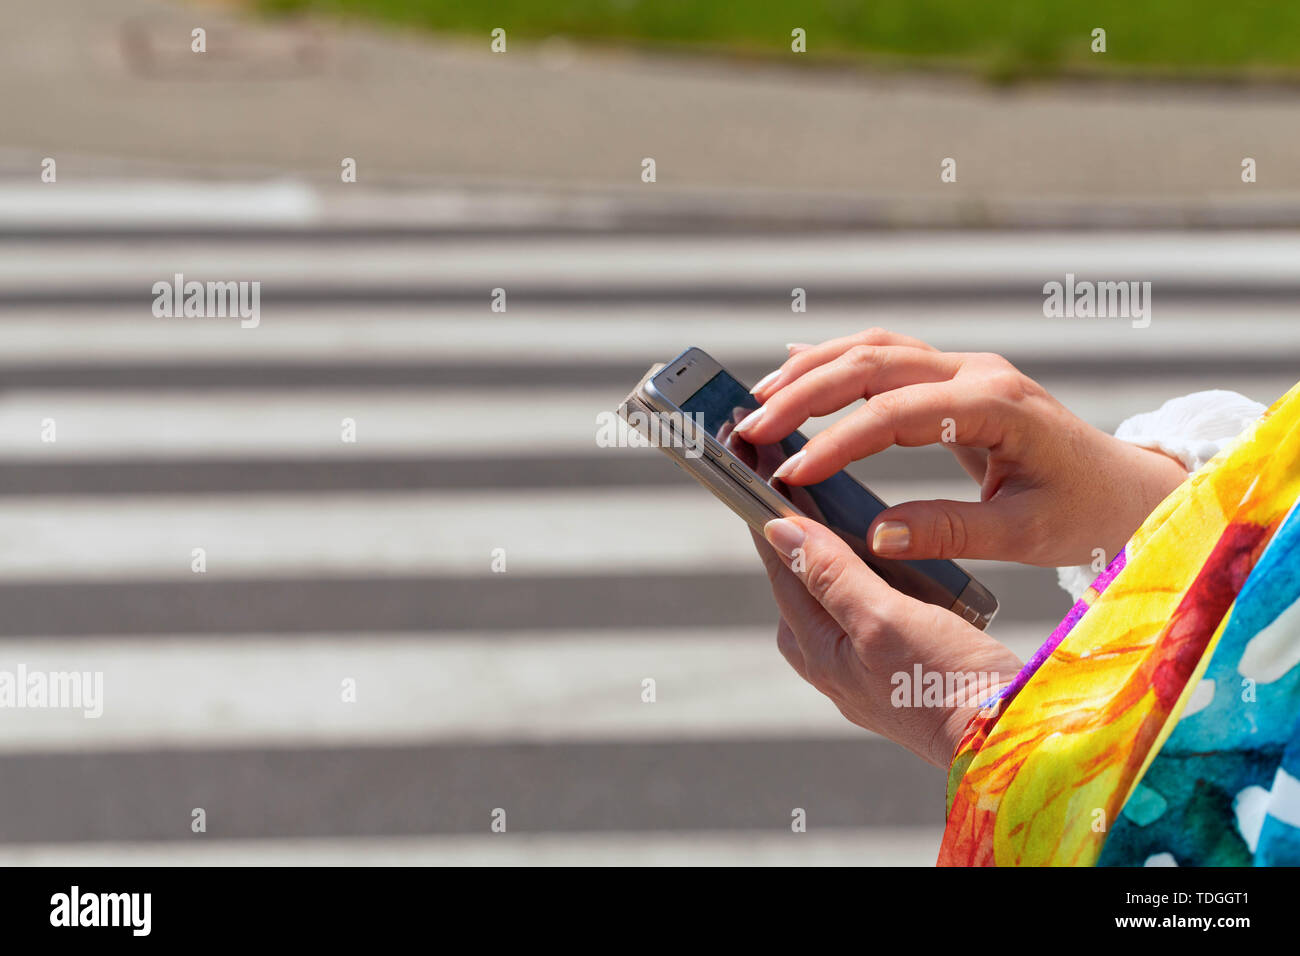 A woaman at a pedestrian crossing looking at the smartphone / safety concept Stock Photo